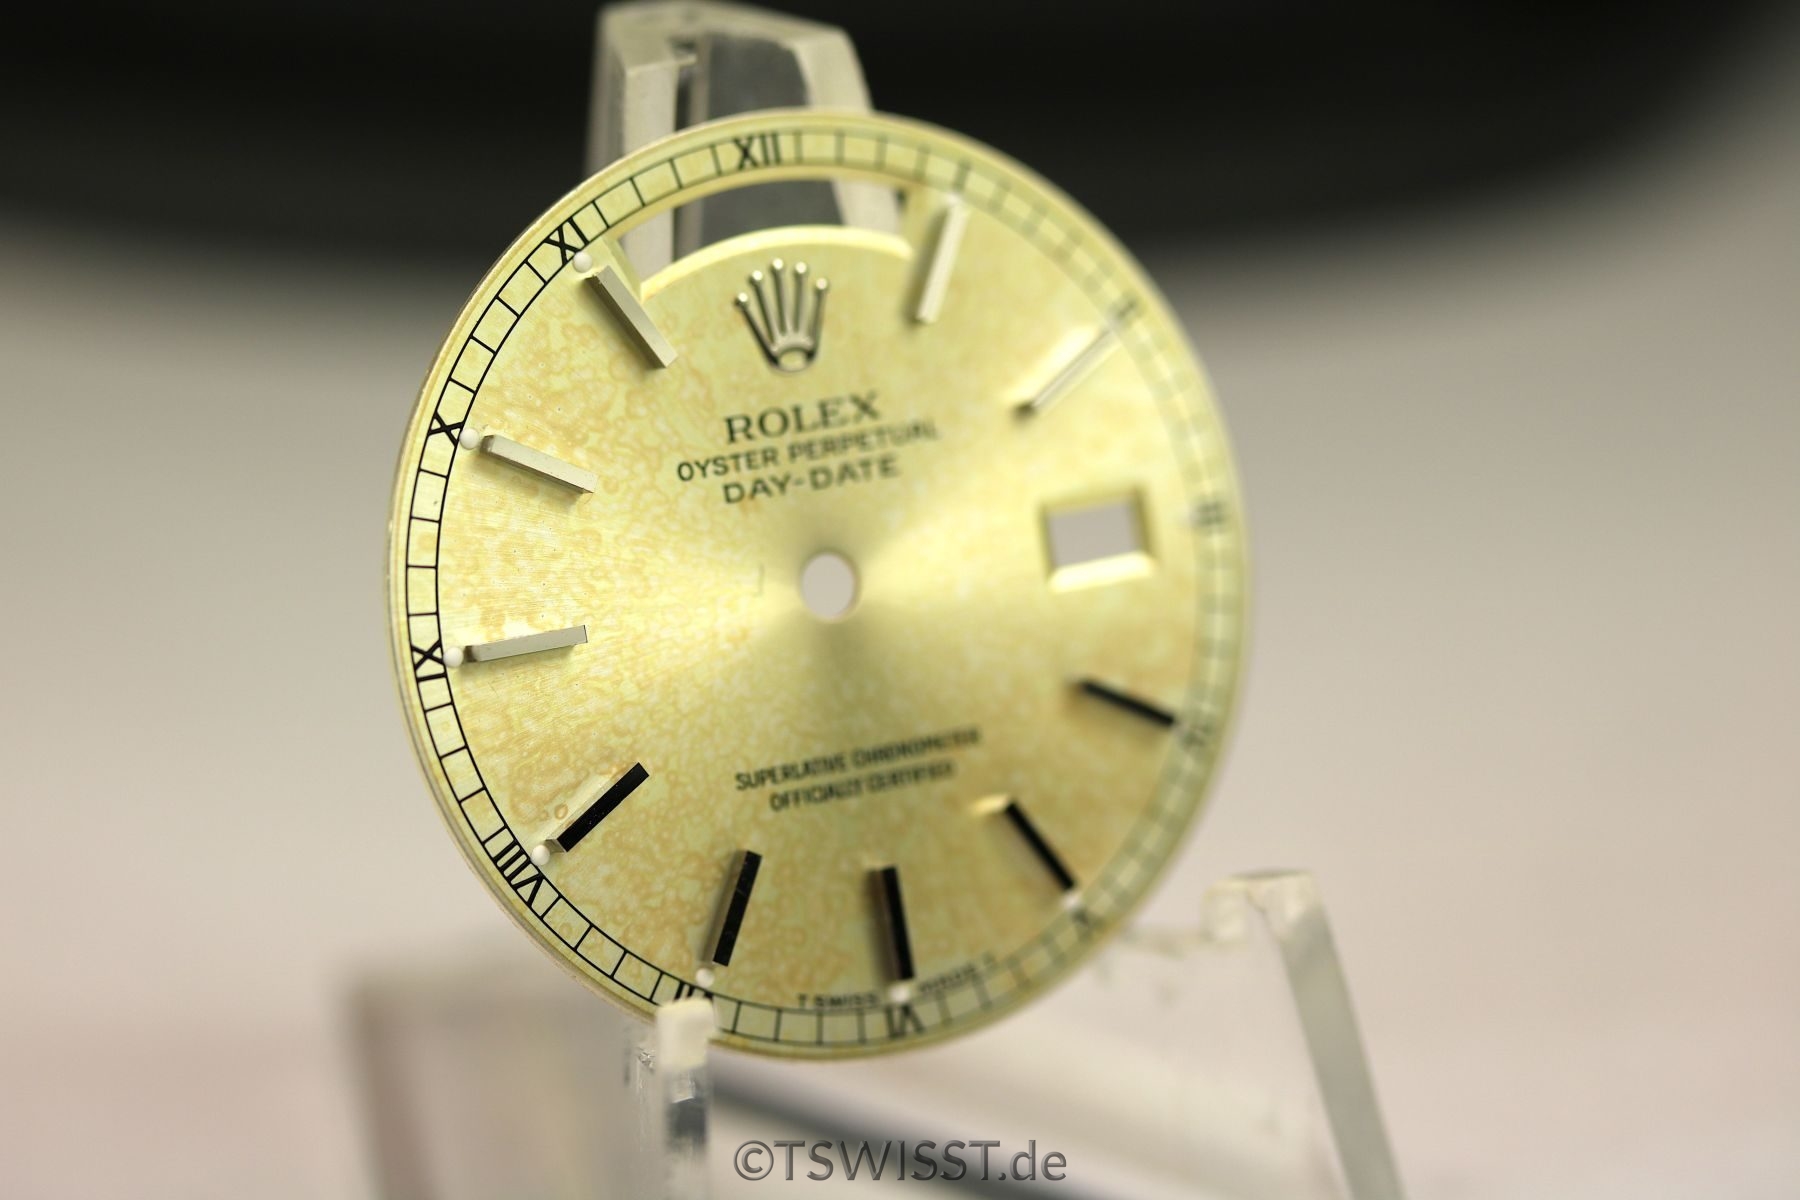 Rolex Day-Date dial